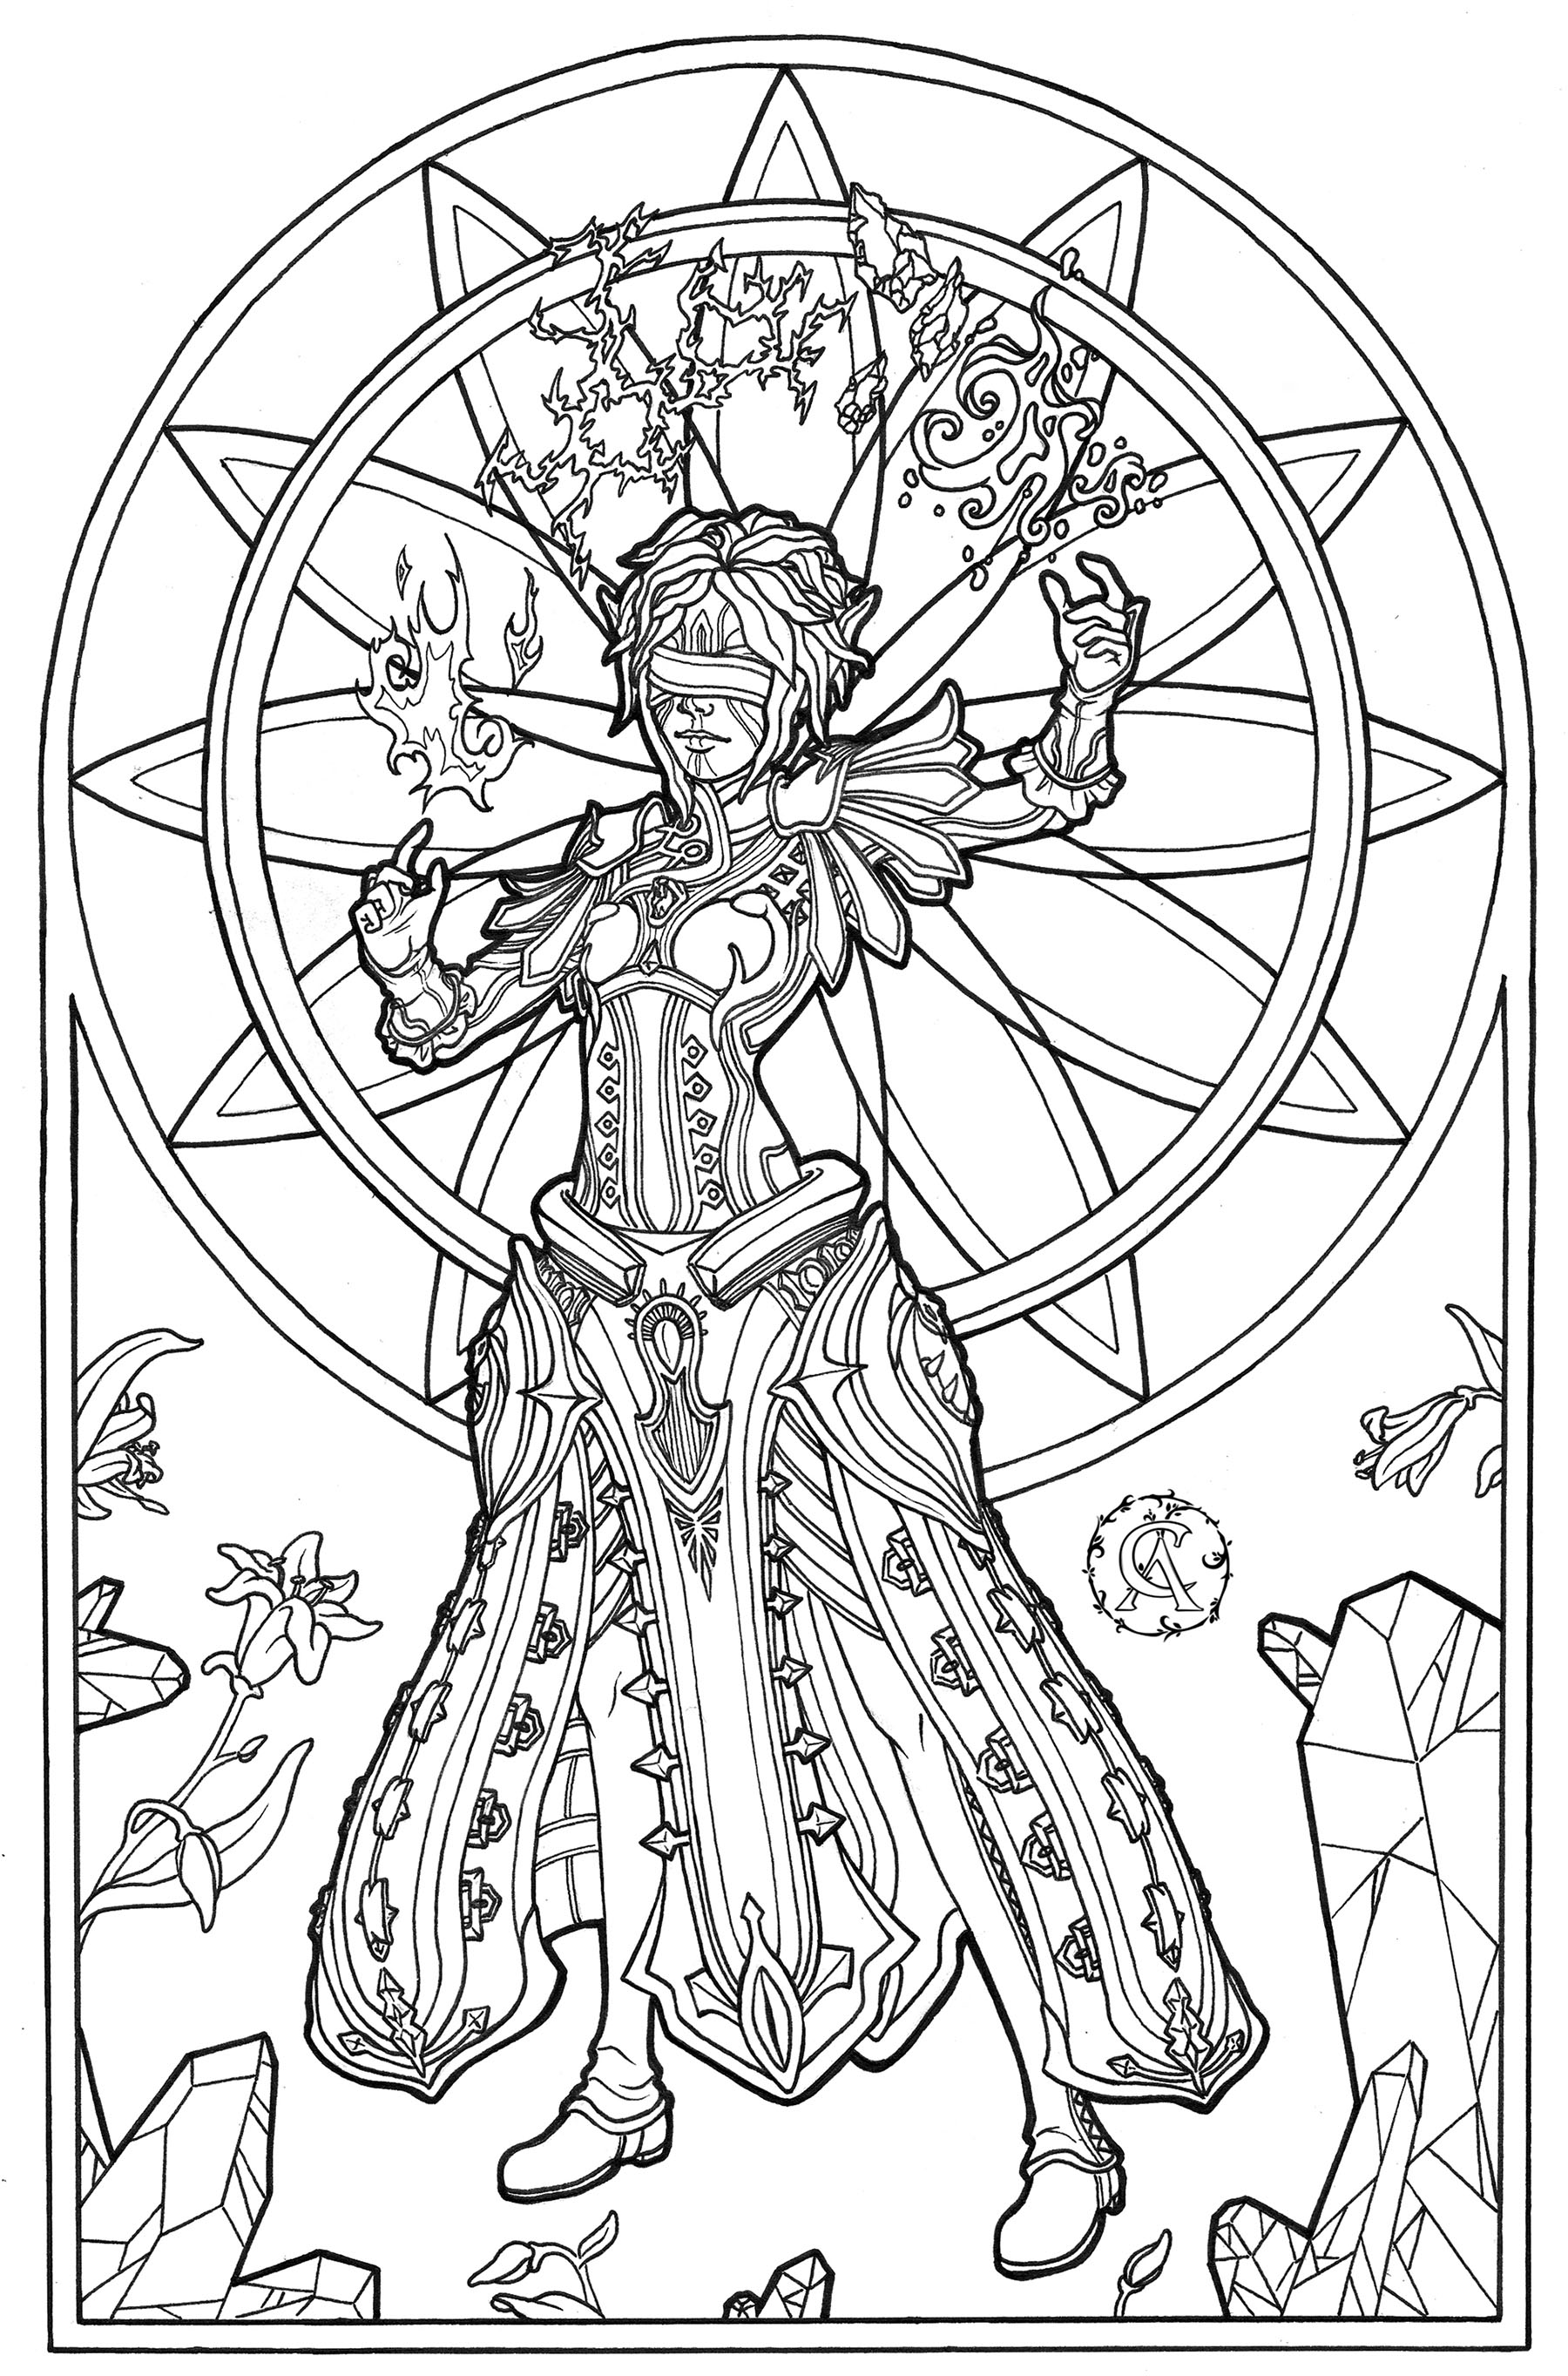 The magician - Myths & legends Adult Coloring Pages